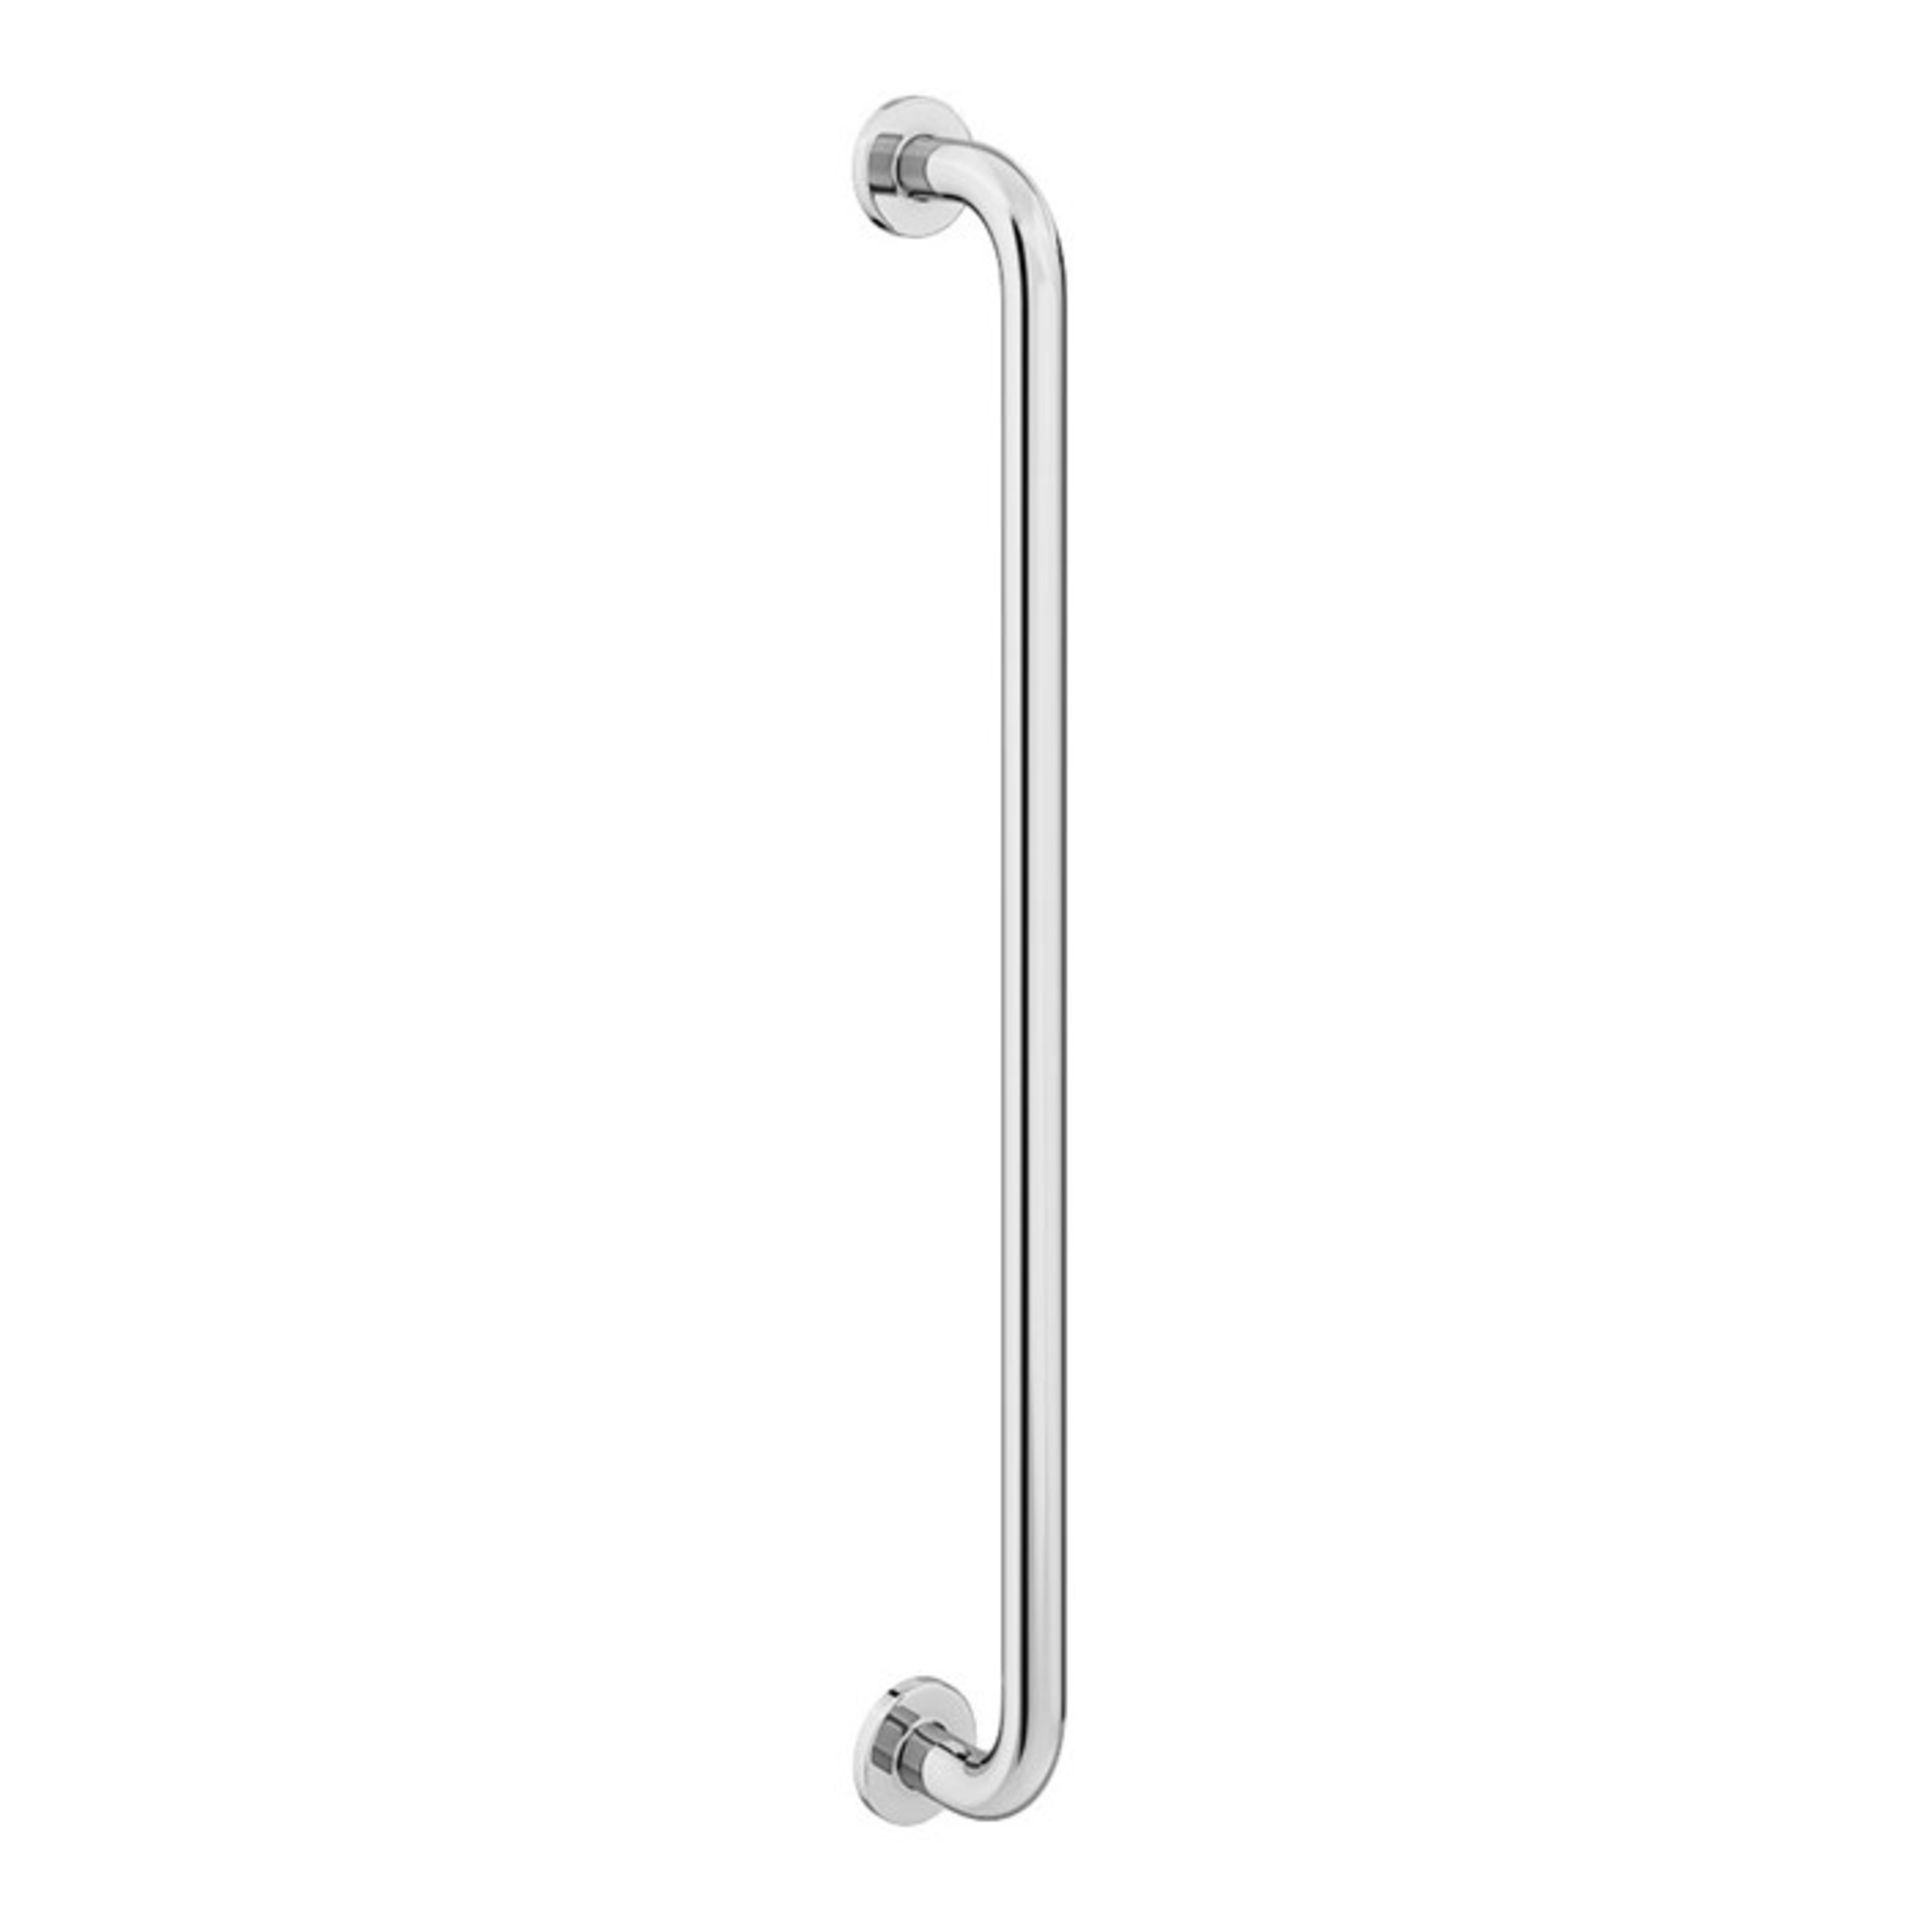 ME : 1 AS NEW BAGGED 24 INCH STAINLESS STEEL GRAB RAIL WITH CONCEALED FITTINGS / RRP £29.95 (VIEWING - Image 2 of 2